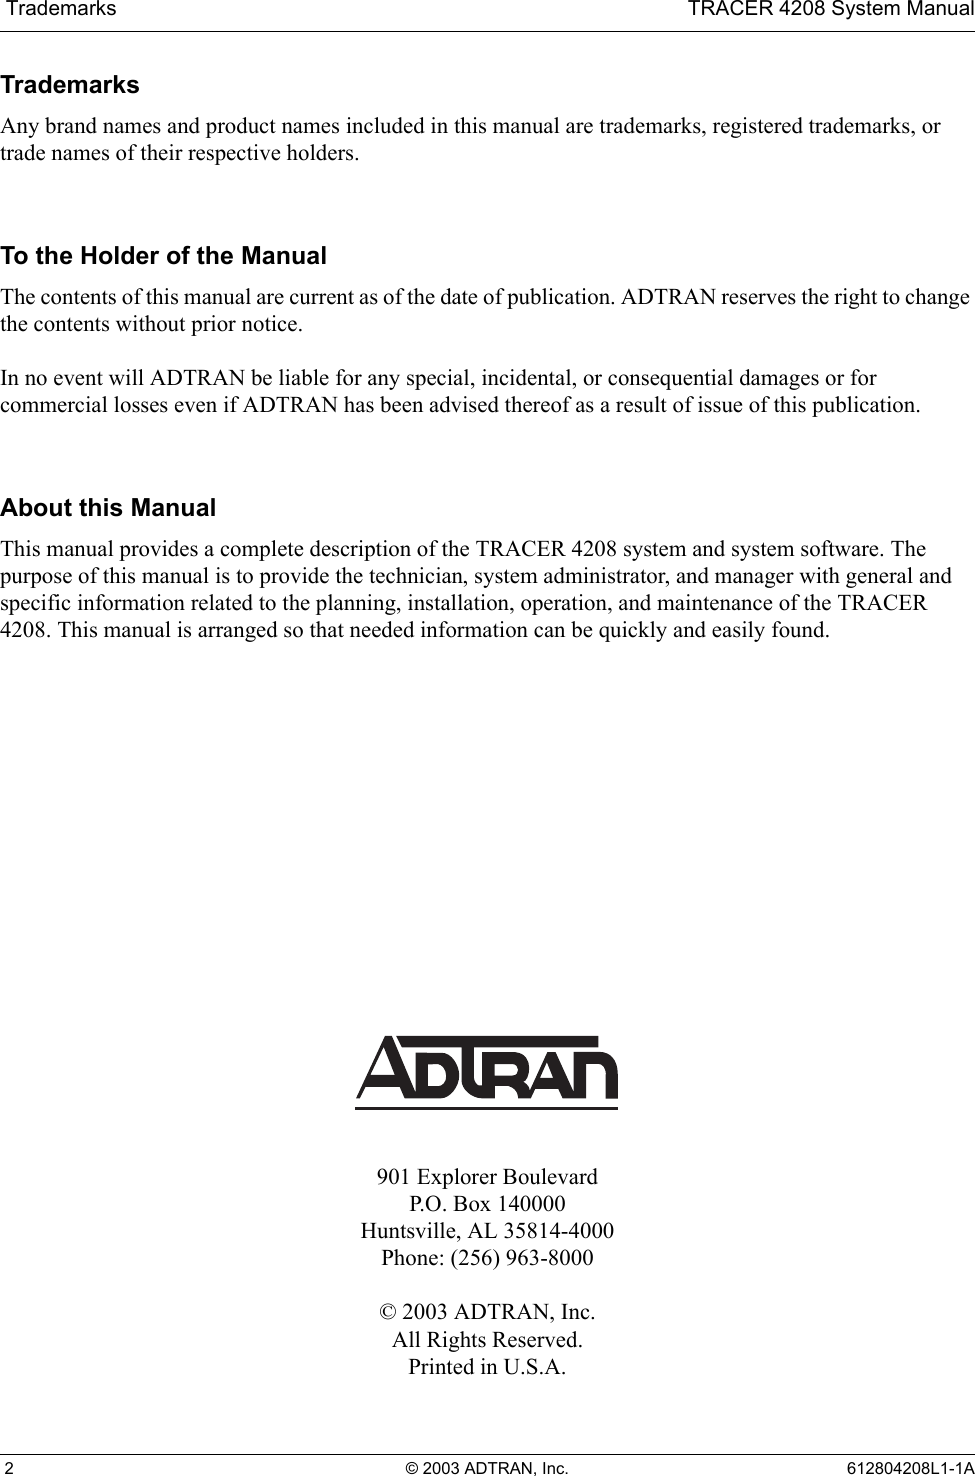  Trademarks TRACER 4208 System Manual 2 © 2003 ADTRAN, Inc. 612804208L1-1ATrademarksAny brand names and product names included in this manual are trademarks, registered trademarks, or trade names of their respective holders.To the Holder of the ManualThe contents of this manual are current as of the date of publication. ADTRAN reserves the right to change the contents without prior notice.In no event will ADTRAN be liable for any special, incidental, or consequential damages or for commercial losses even if ADTRAN has been advised thereof as a result of issue of this publication.About this ManualThis manual provides a complete description of the TRACER 4208 system and system software. The purpose of this manual is to provide the technician, system administrator, and manager with general and specific information related to the planning, installation, operation, and maintenance of the TRACER 4208. This manual is arranged so that needed information can be quickly and easily found. 901 Explorer BoulevardP.O. Box 140000Huntsville, AL 35814-4000Phone: (256) 963-8000© 2003 ADTRAN, Inc.All Rights Reserved.Printed in U.S.A.